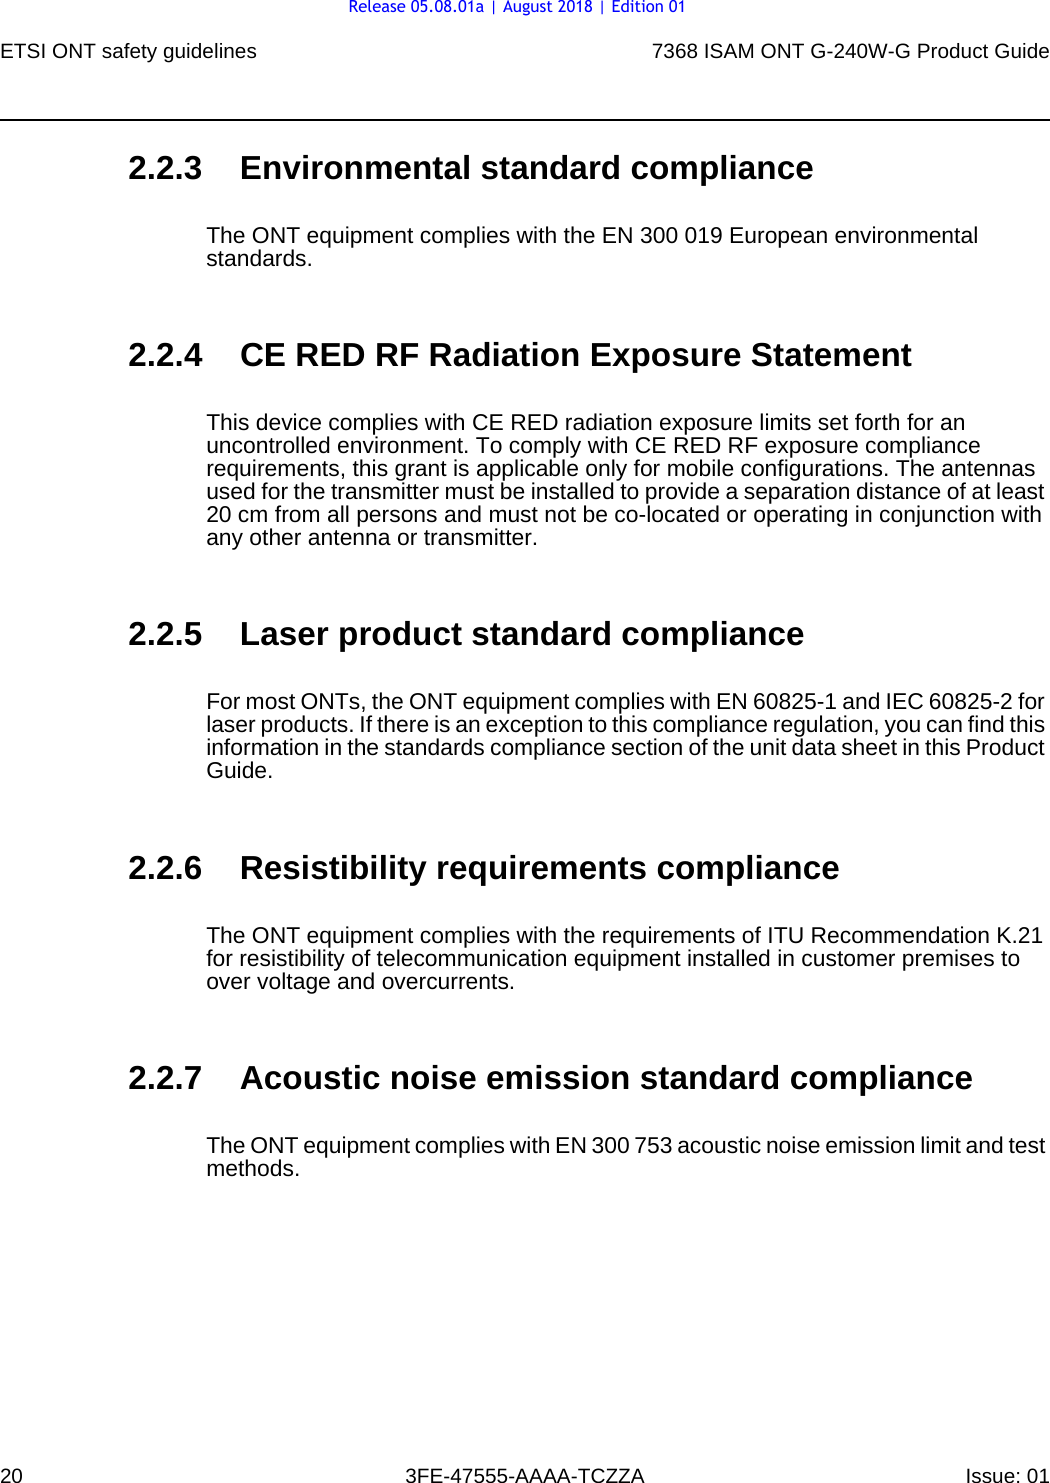 ETSI ONT safety guidelines207368 ISAM ONT G-240W-G Product Guide3FE-47555-AAAA-TCZZA Issue: 01 2.2.3 Environmental standard complianceThe ONT equipment complies with the EN 300 019 European environmental standards.2.2.4 CE RED RF Radiation Exposure StatementThis device complies with CE RED radiation exposure limits set forth for an uncontrolled environment. To comply with CE RED RF exposure compliance requirements, this grant is applicable only for mobile configurations. The antennas used for the transmitter must be installed to provide a separation distance of at least 20 cm from all persons and must not be co-located or operating in conjunction with any other antenna or transmitter.2.2.5 Laser product standard complianceFor most ONTs, the ONT equipment complies with EN 60825-1 and IEC 60825-2 for laser products. If there is an exception to this compliance regulation, you can find this information in the standards compliance section of the unit data sheet in this Product Guide.2.2.6 Resistibility requirements complianceThe ONT equipment complies with the requirements of ITU Recommendation K.21 for resistibility of telecommunication equipment installed in customer premises to over voltage and overcurrents.2.2.7 Acoustic noise emission standard complianceThe ONT equipment complies with EN 300 753 acoustic noise emission limit and test methods. Release 05.08.01a | August 2018 | Edition 01